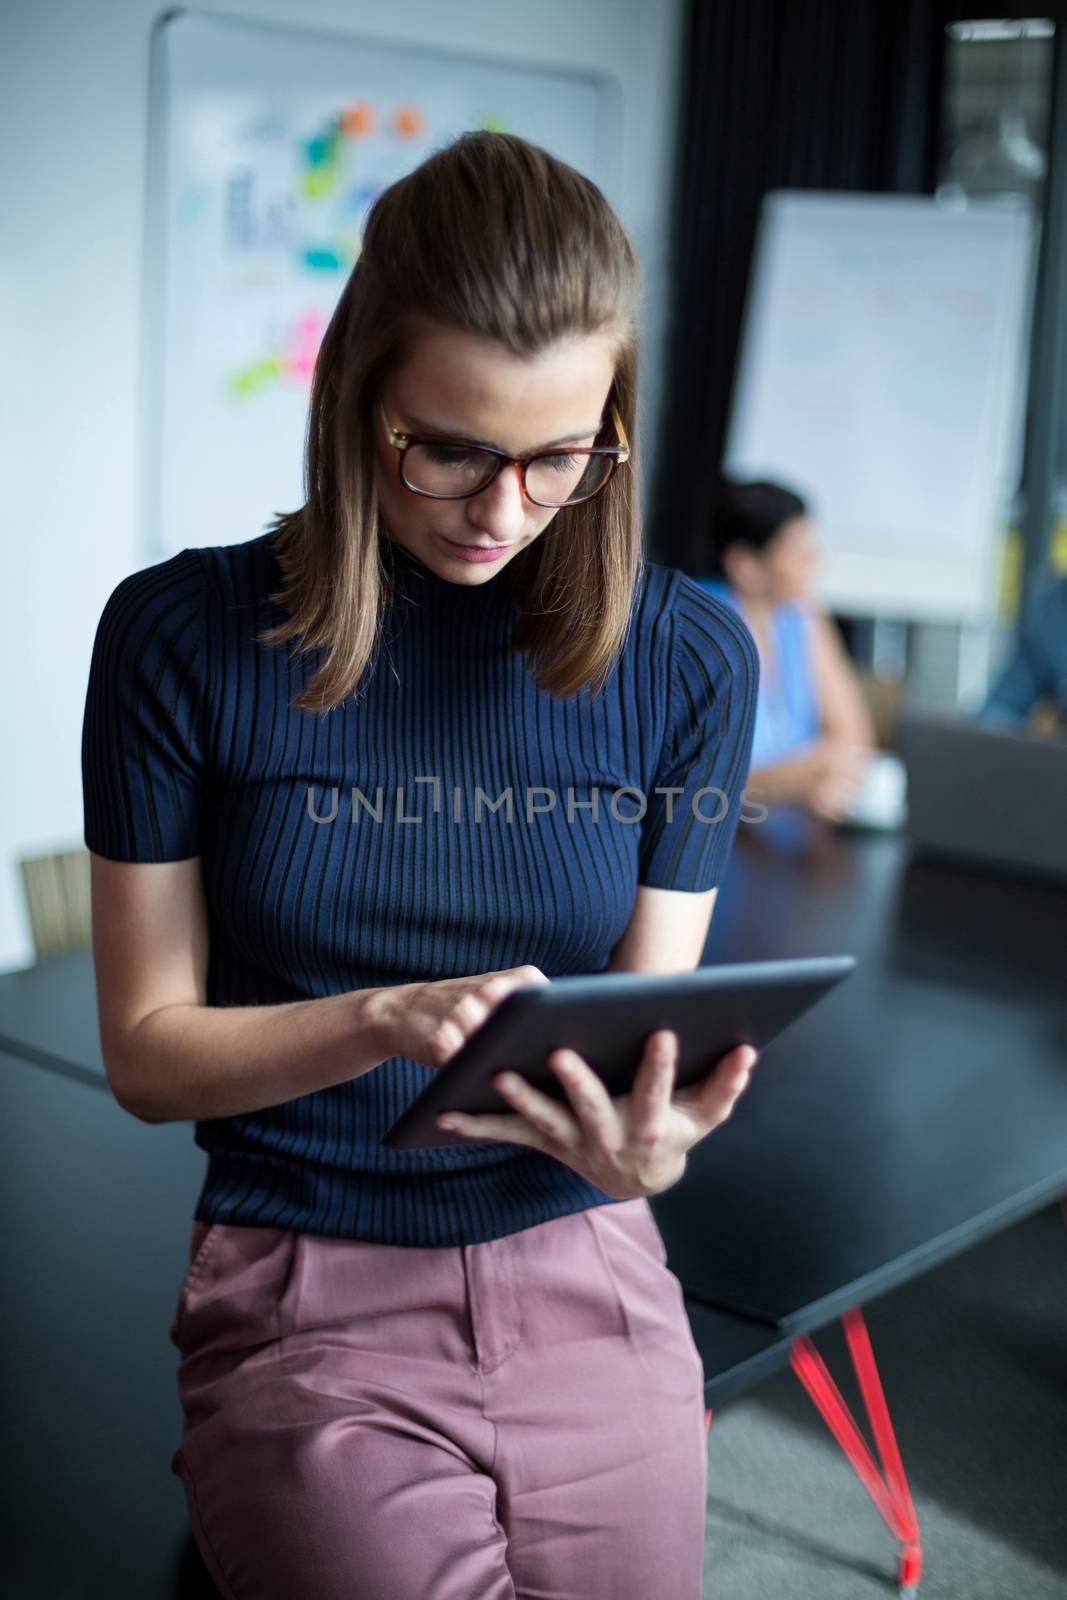 Business executive using digital tablet in office by Wavebreakmedia